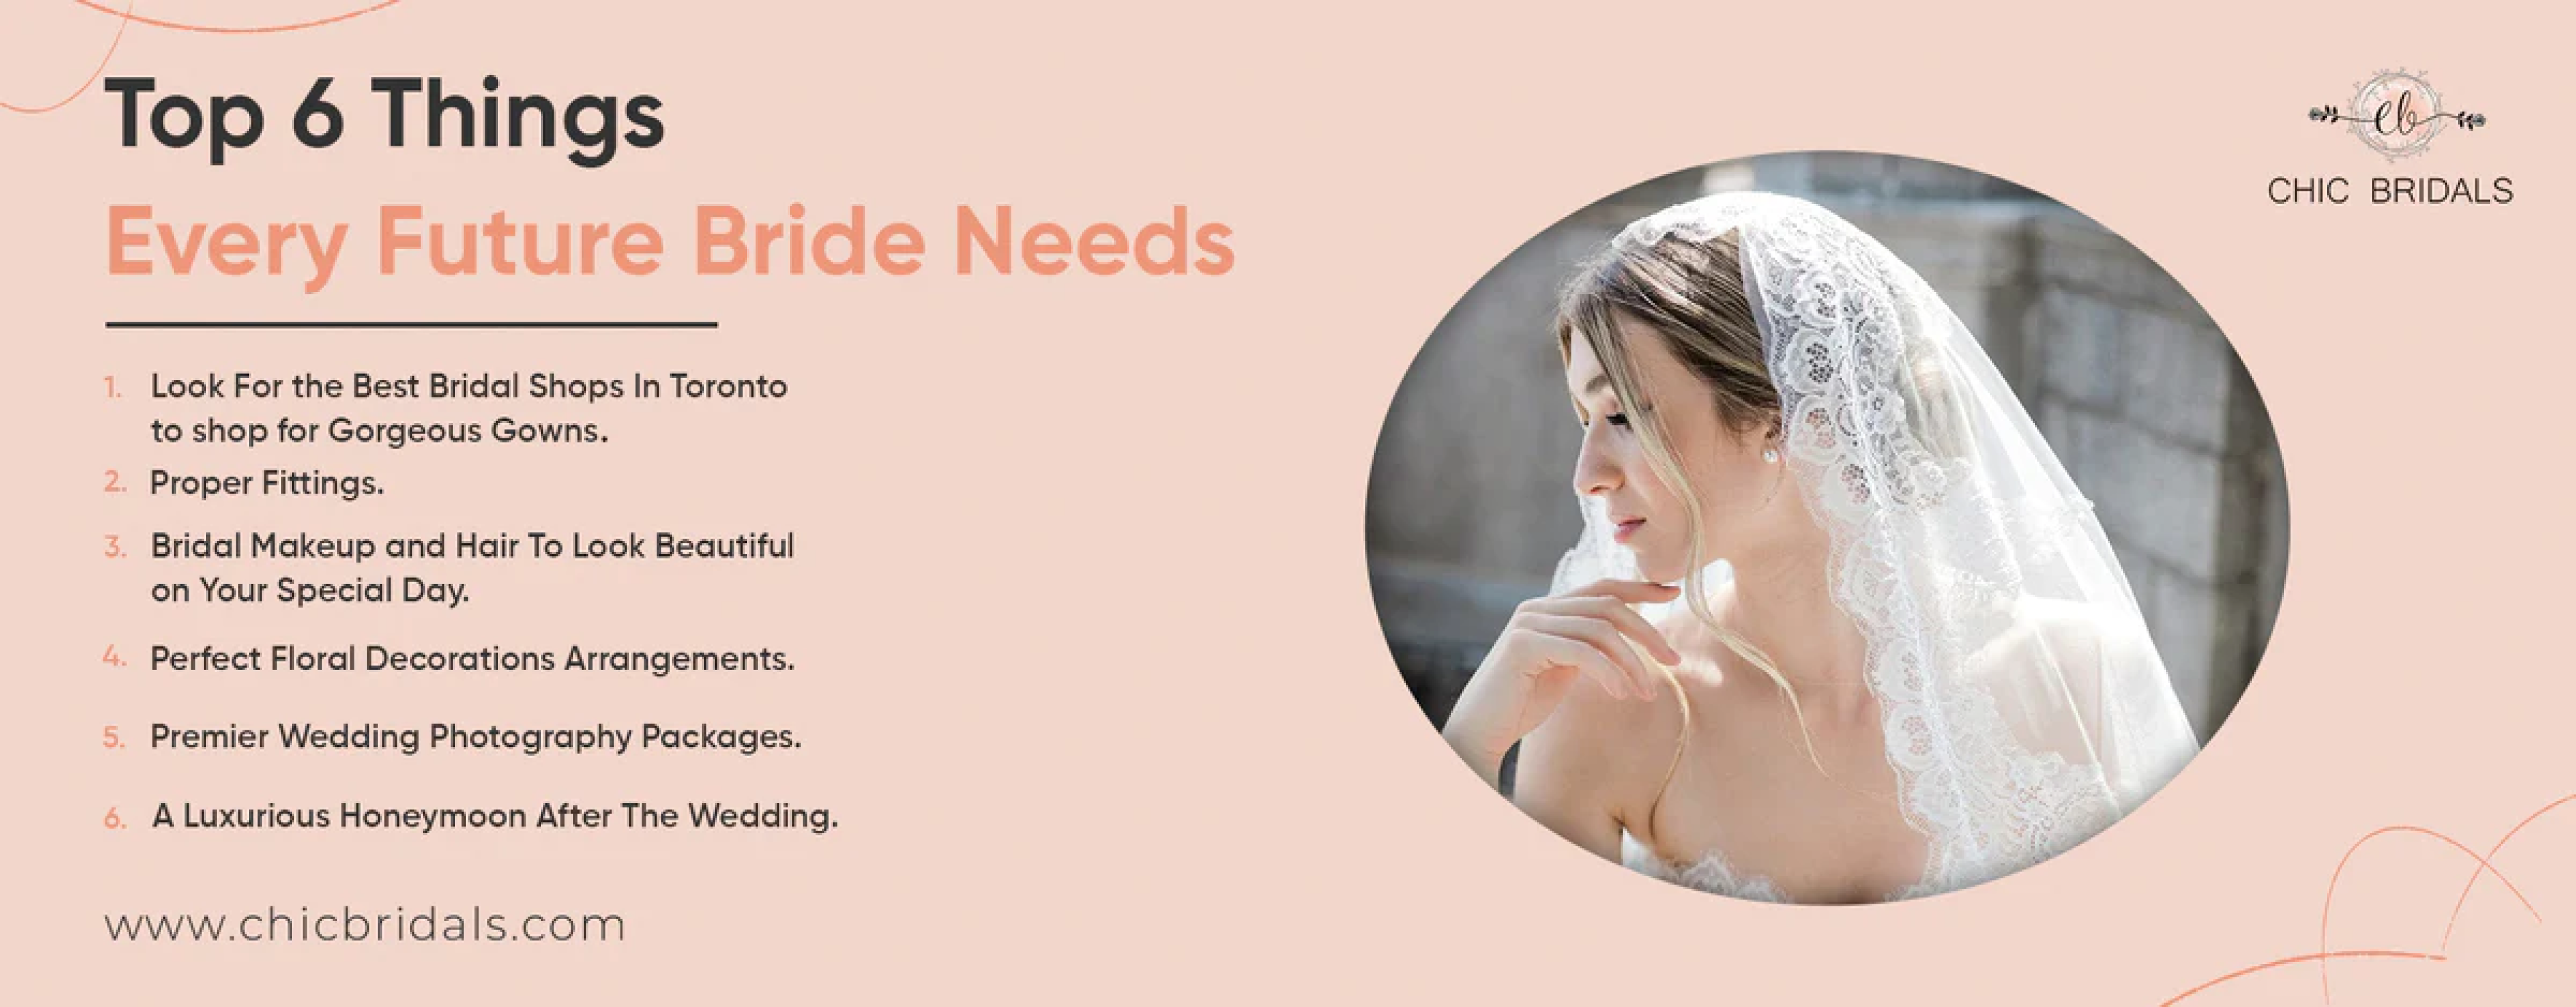 Top 6 Things Every Future Bride Needs